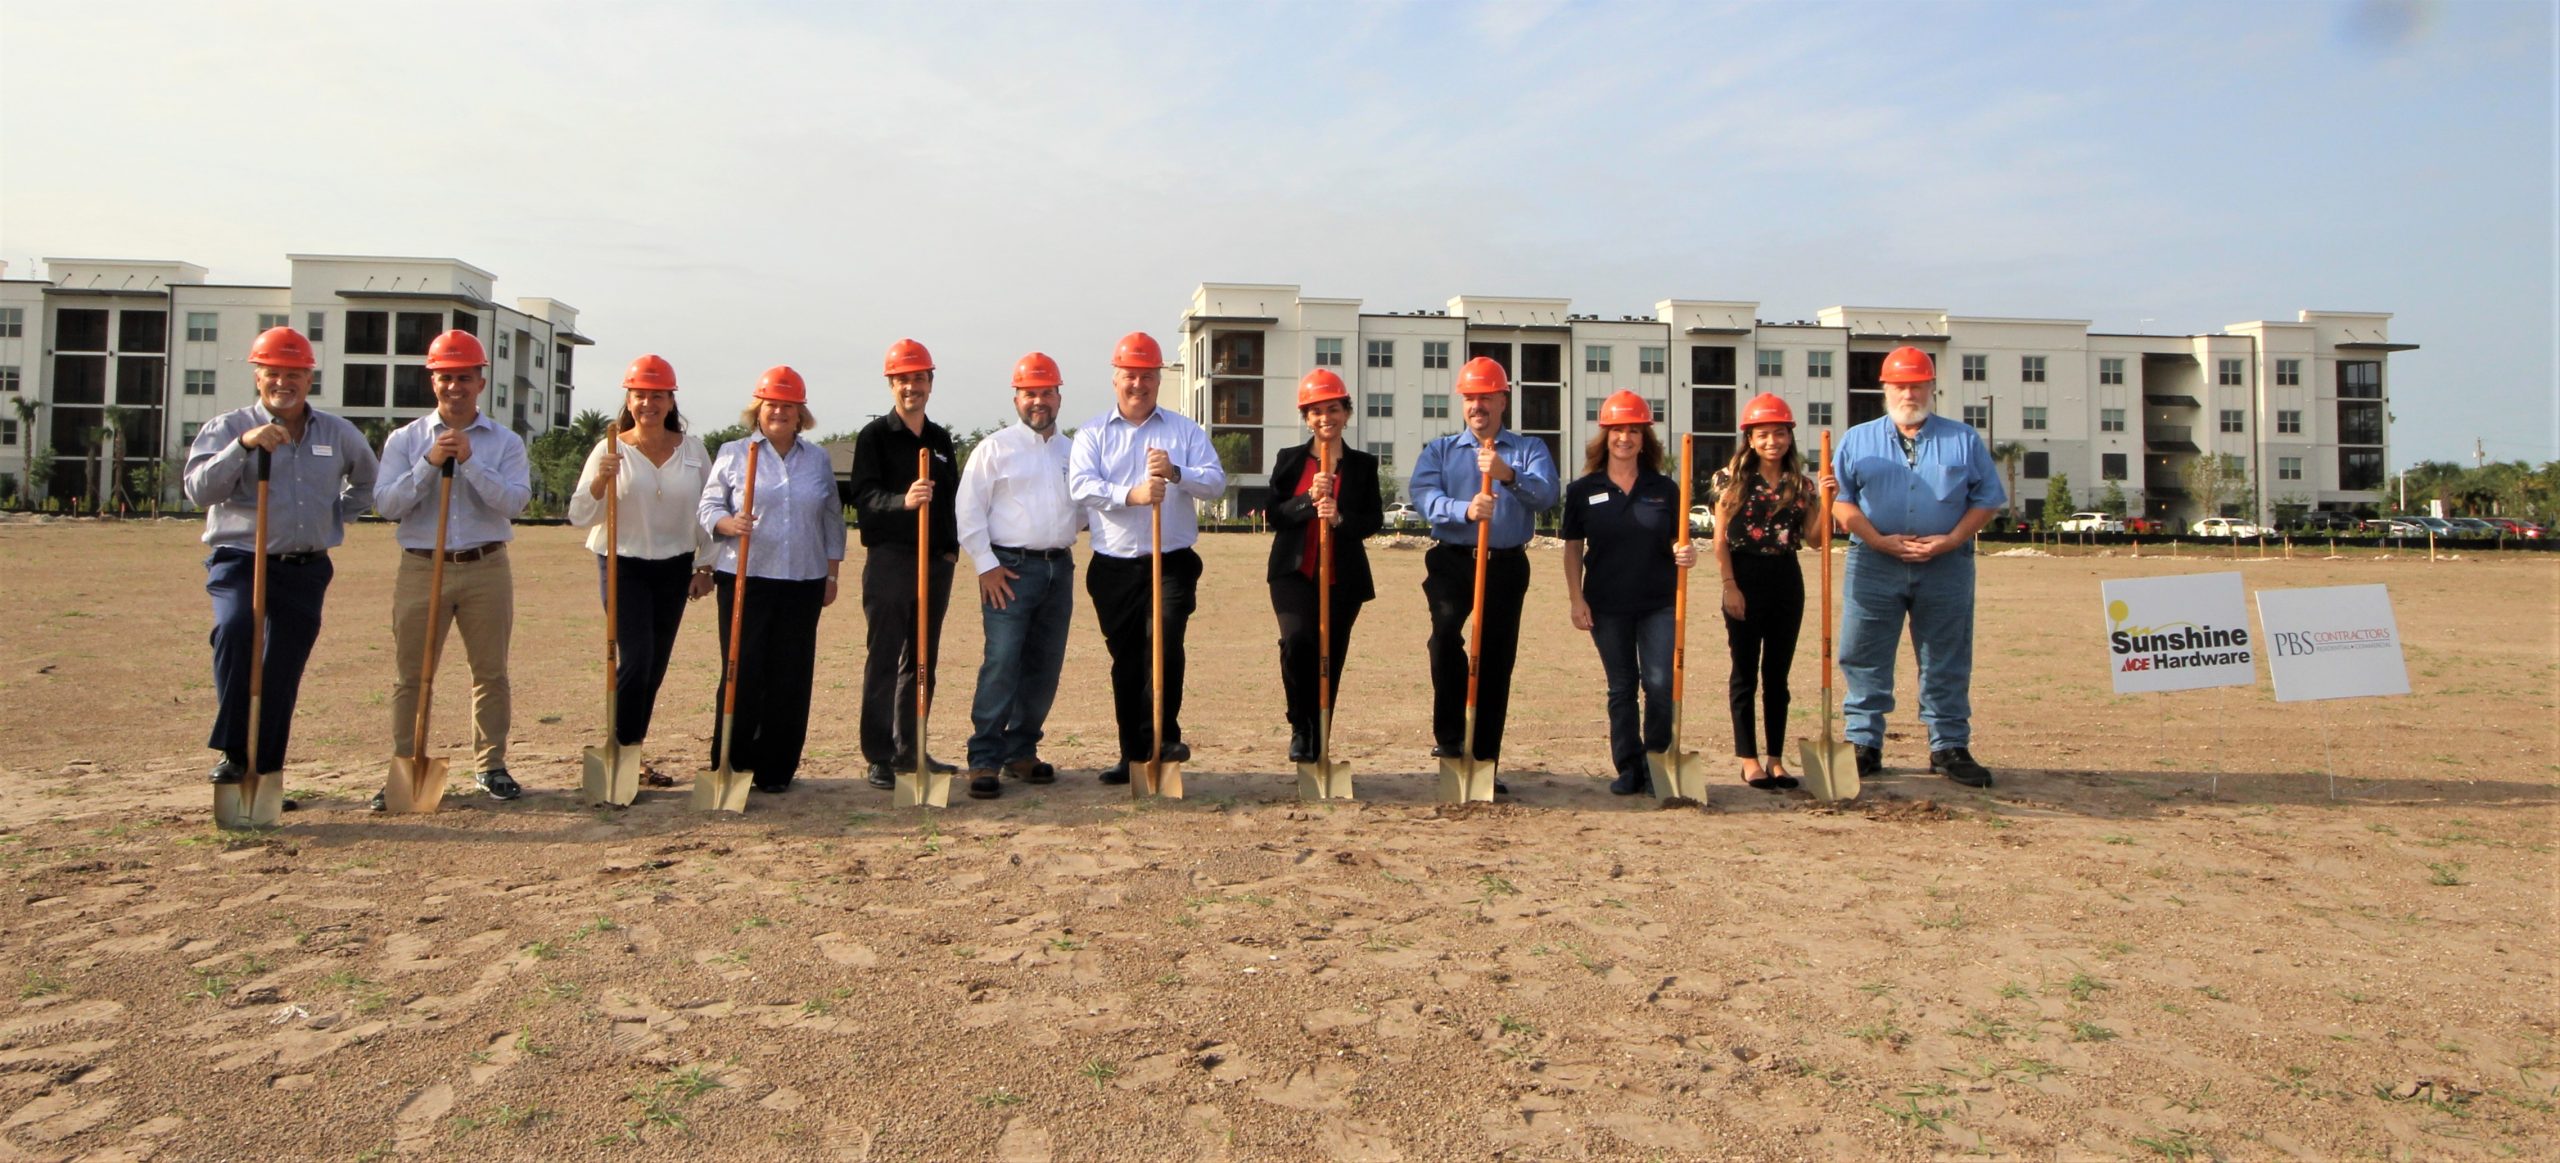 PBS CONTRACTORS BREAKS GROUND ON A NEW SUNSHINE ACE HARDWARE LOCATION AT FOUNDERS SQUARE 